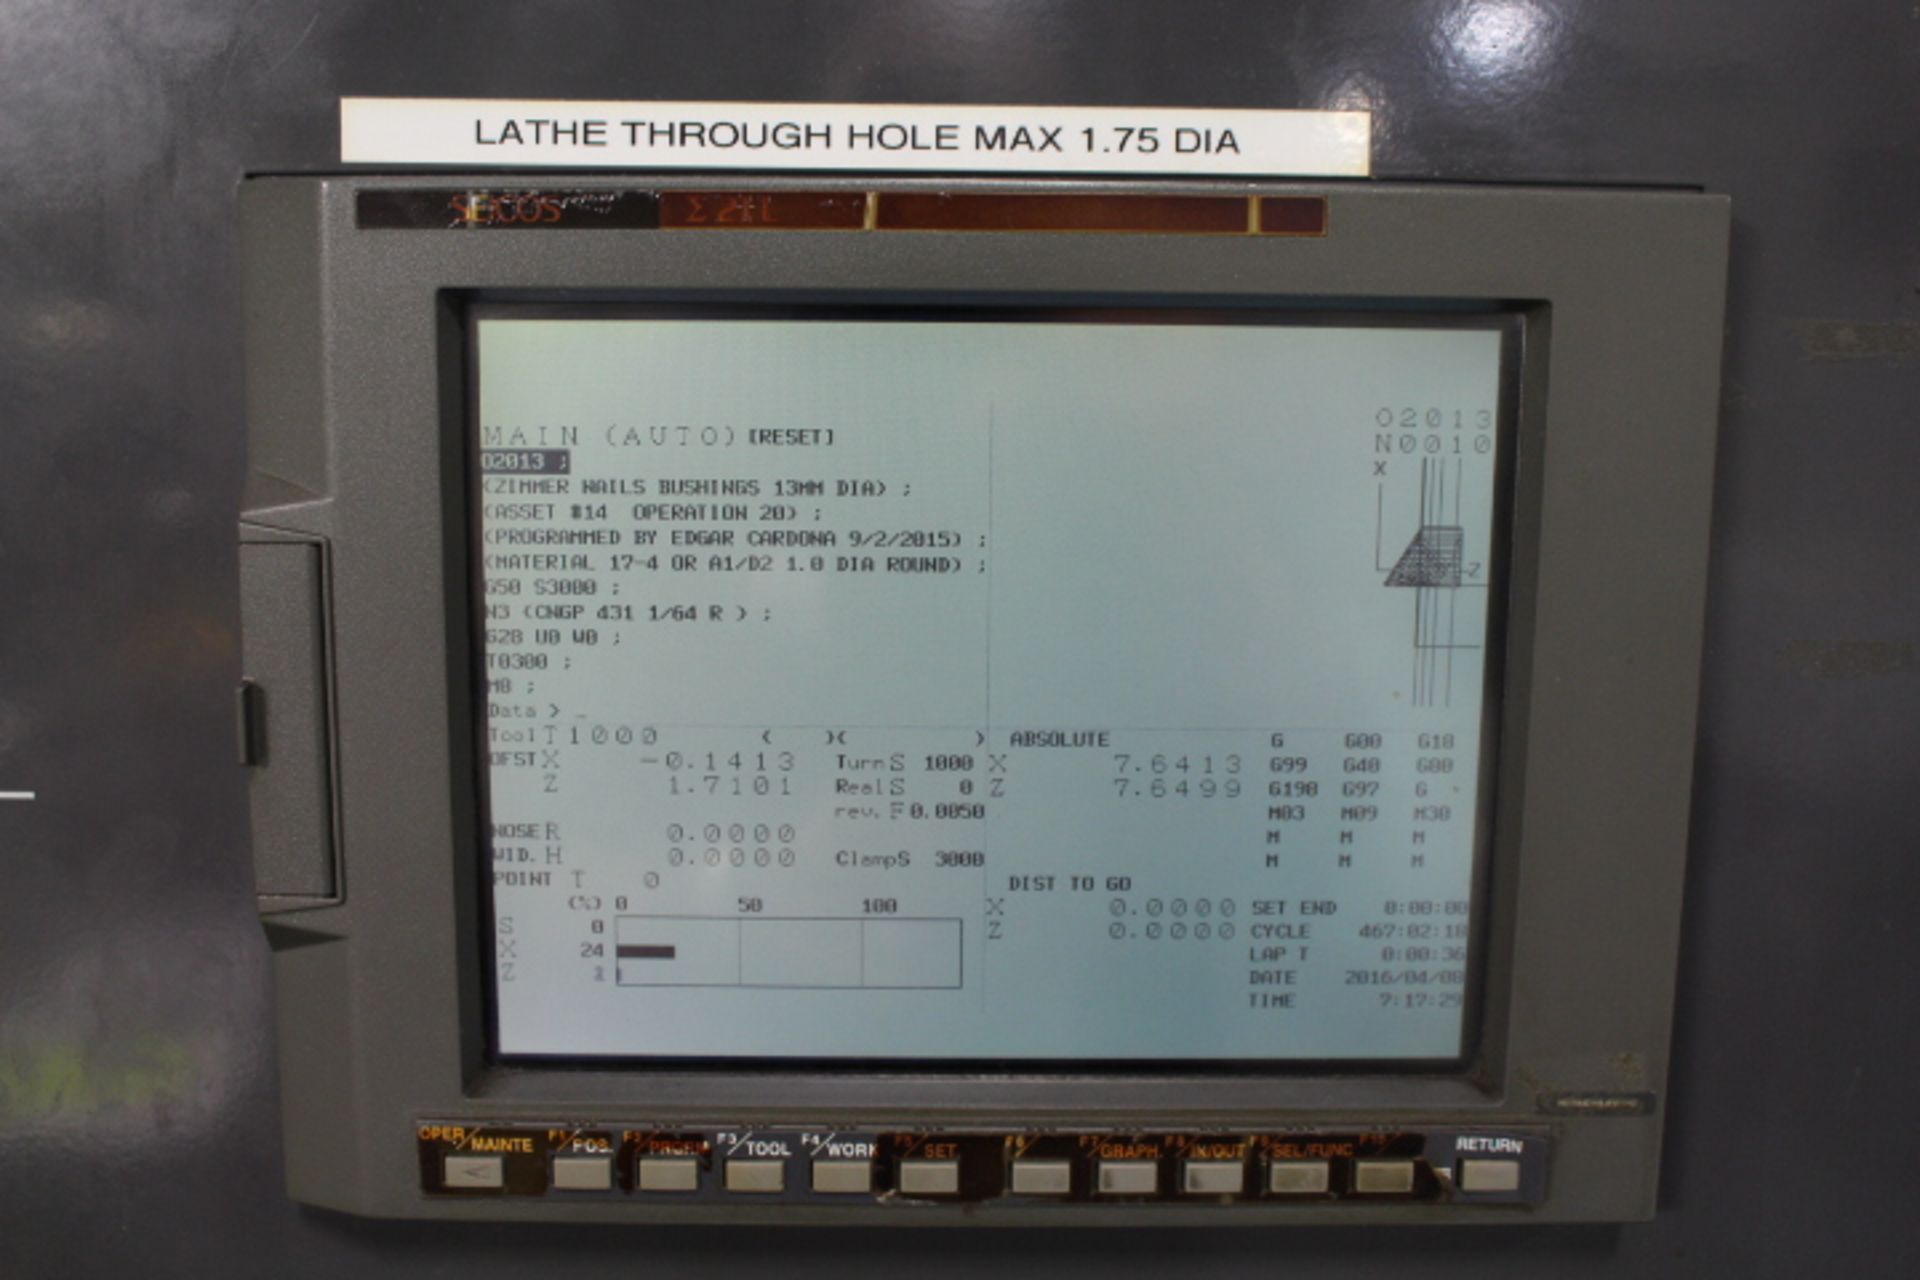 HITACHI SEIKI TS15 CNC MILL/TURNING CENTER, FULL C AXIS, LIVE TOOLS, 6,000 RPM, 12 STATION TURRET, - Image 5 of 5